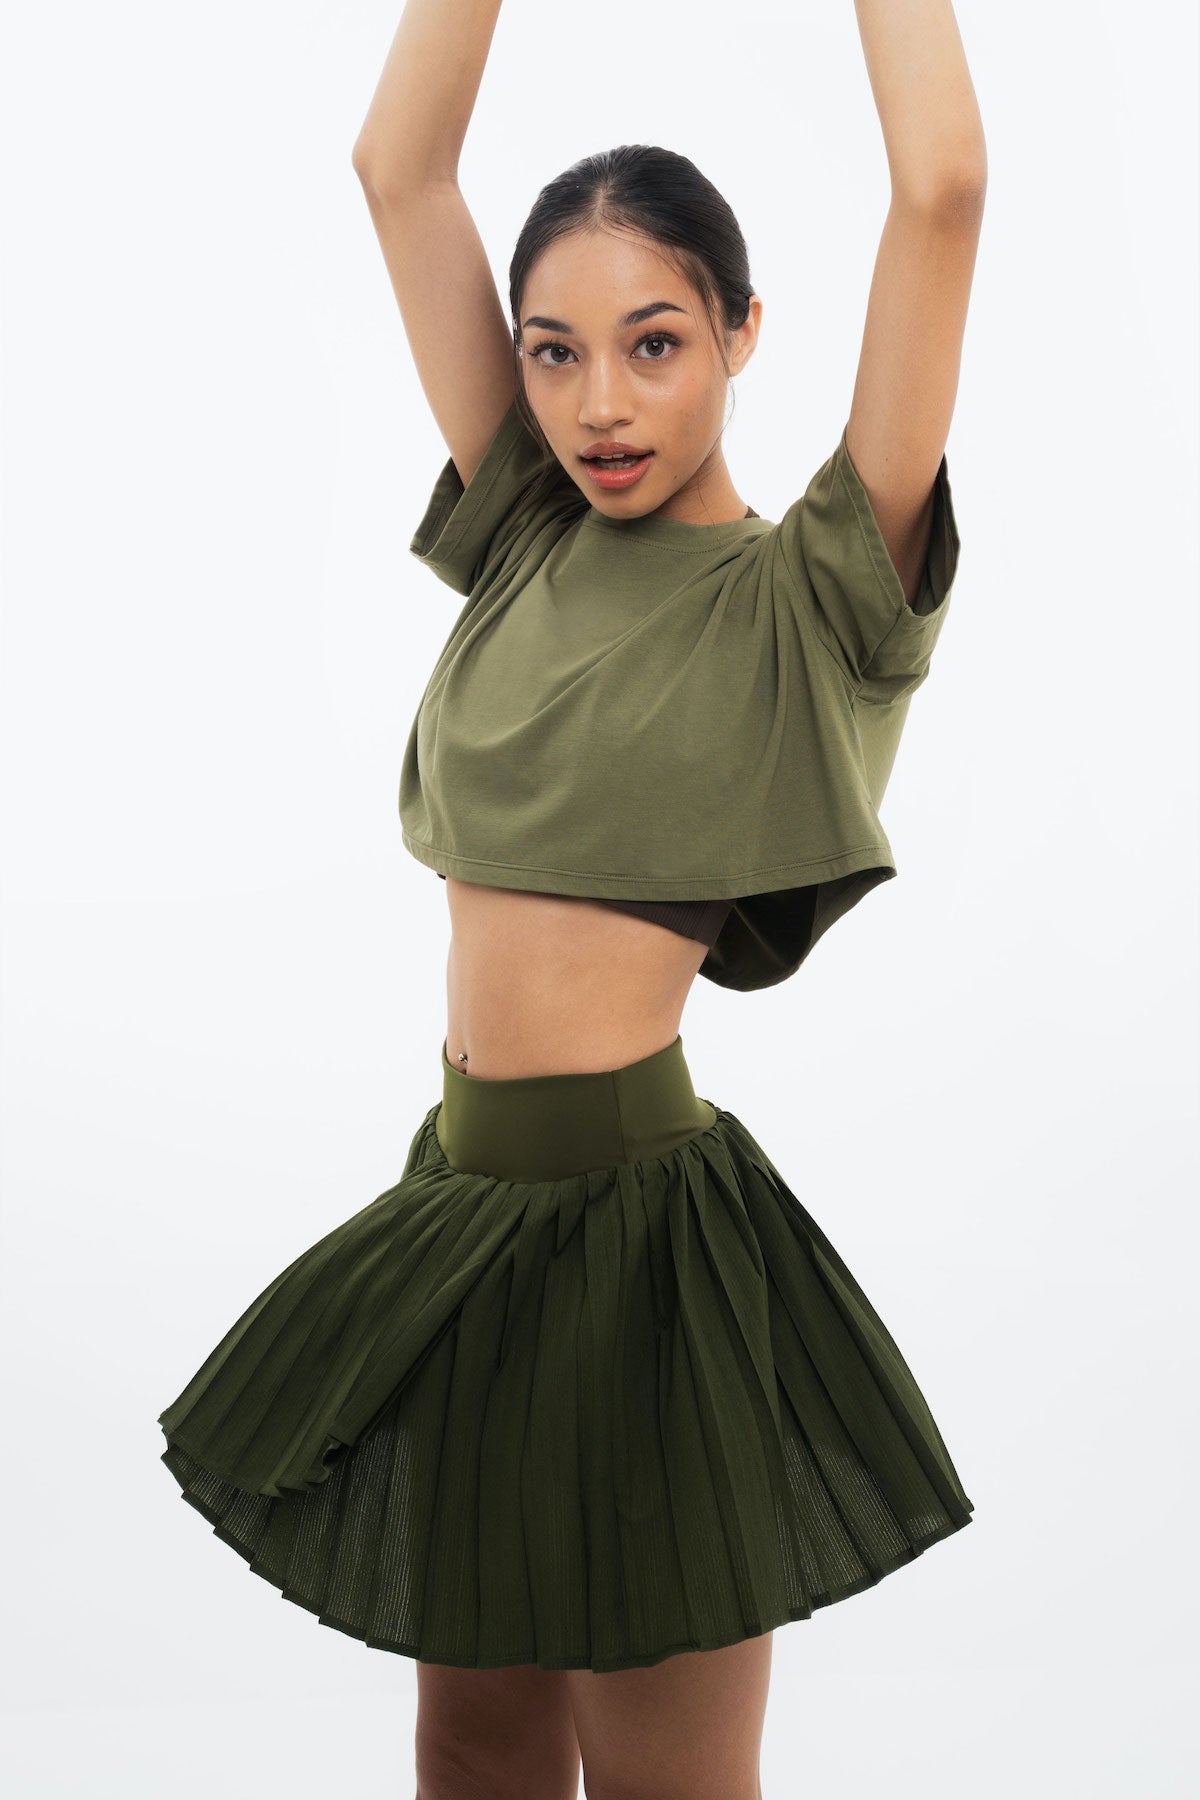 Movable Crop Shirt in Green (2 Left)